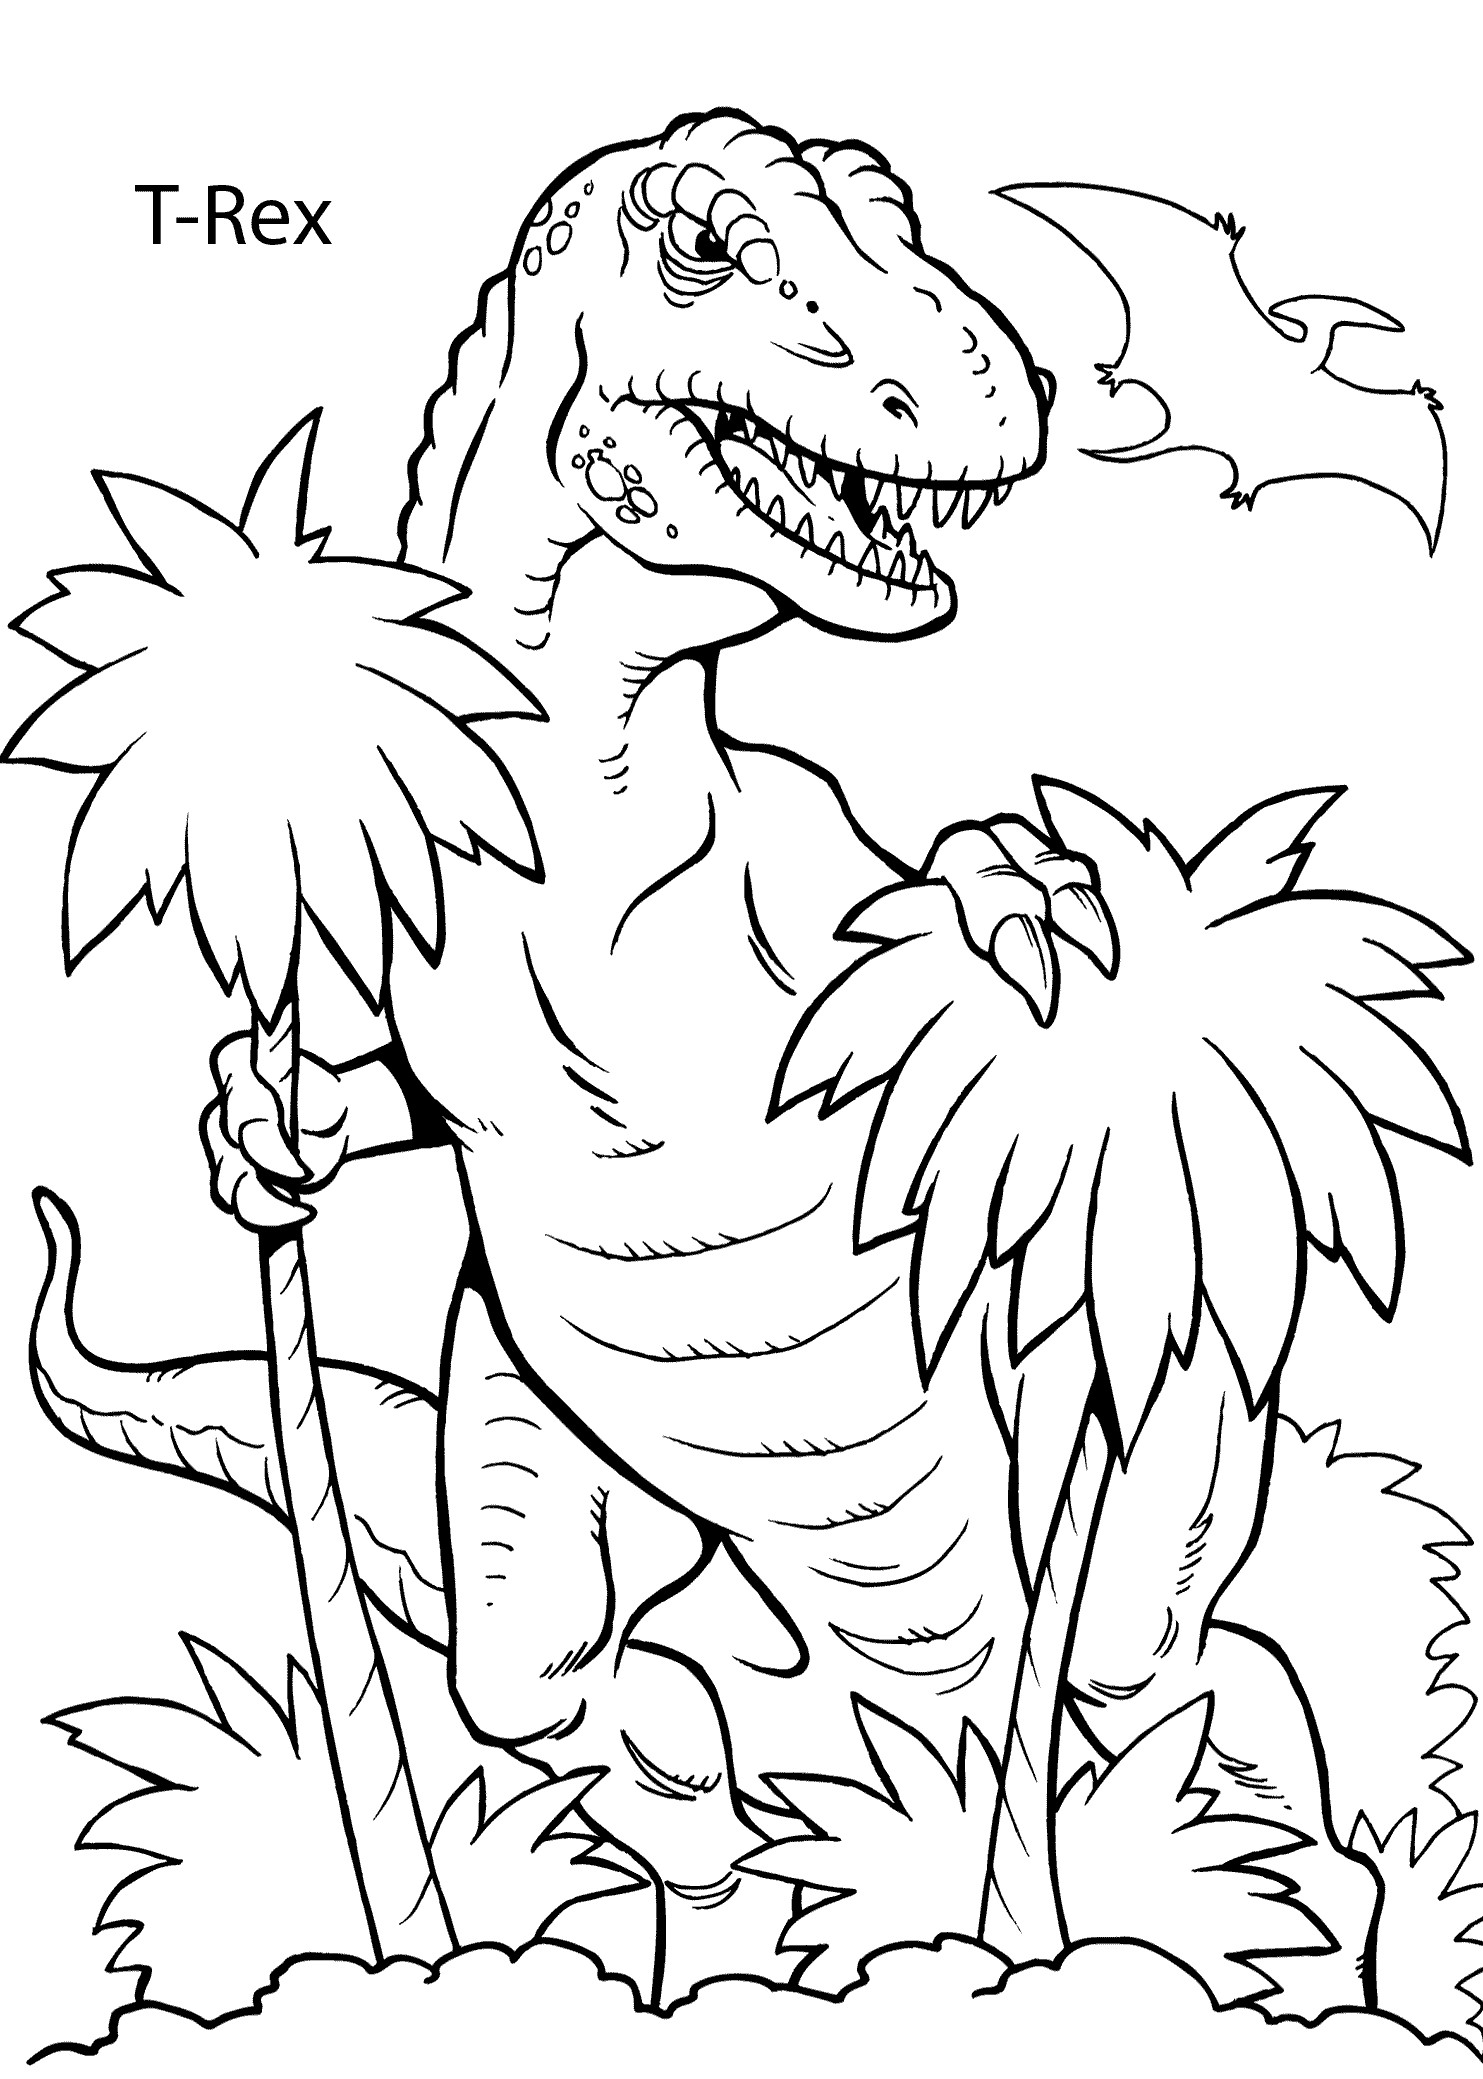 Dinosaur Coloring Pages For Toddlers
 T Rex dinosaur coloring pages for kids printable free